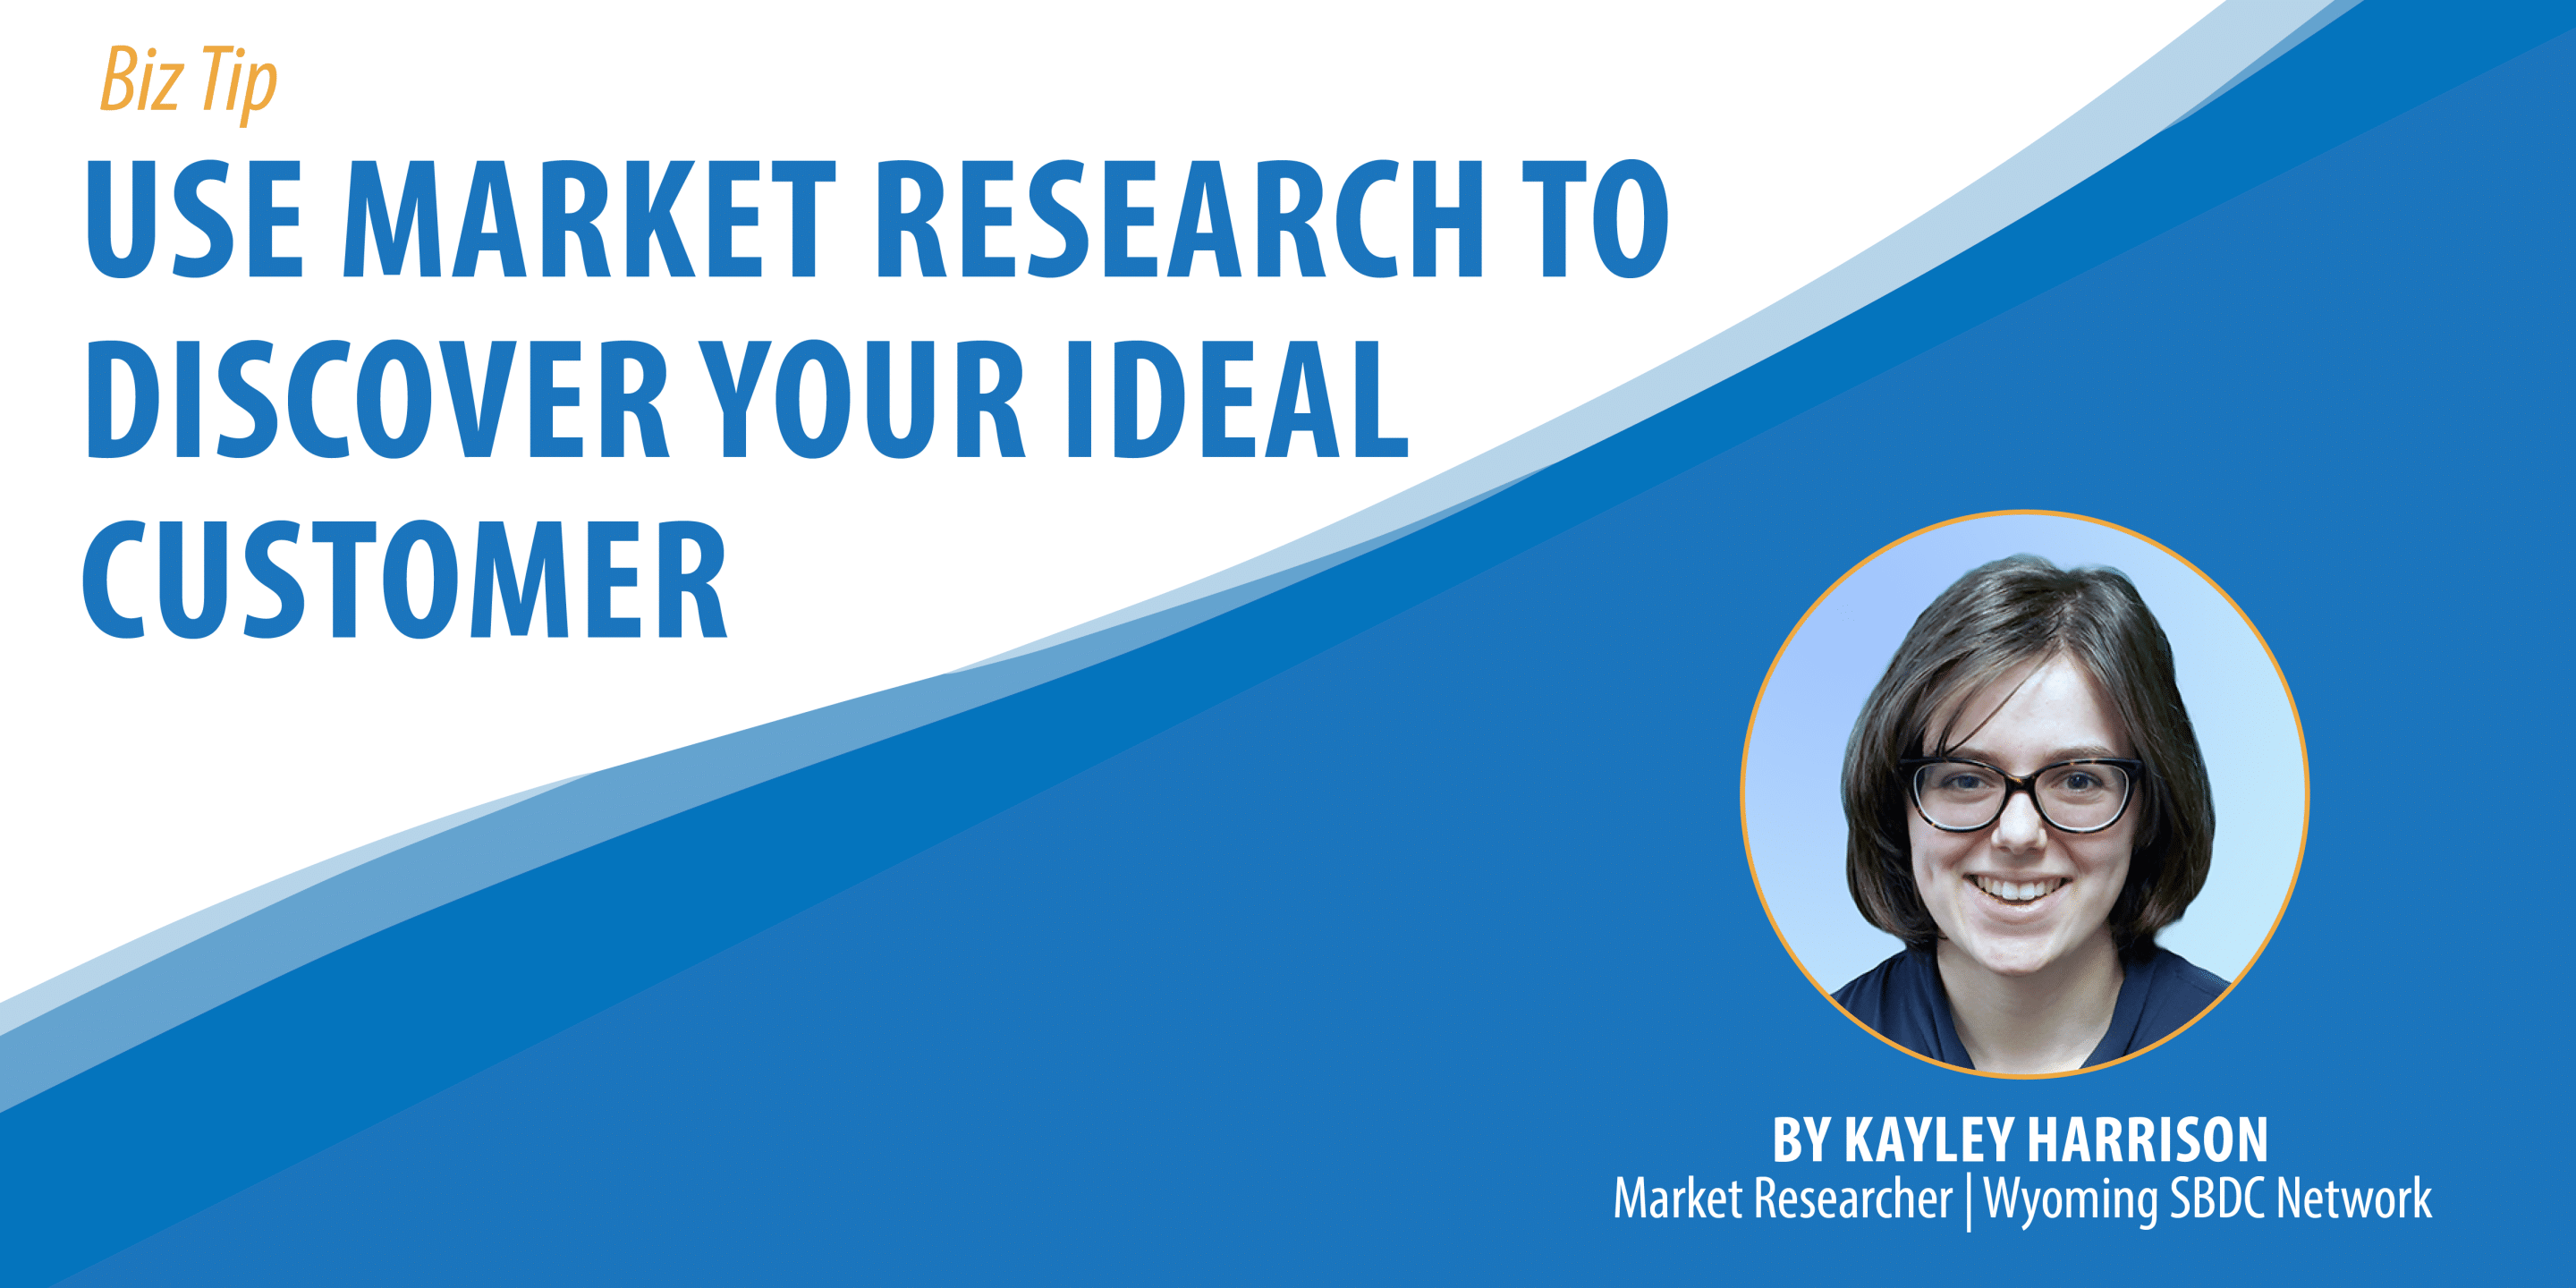 Use Market Research to Discover Your Ideal Customer